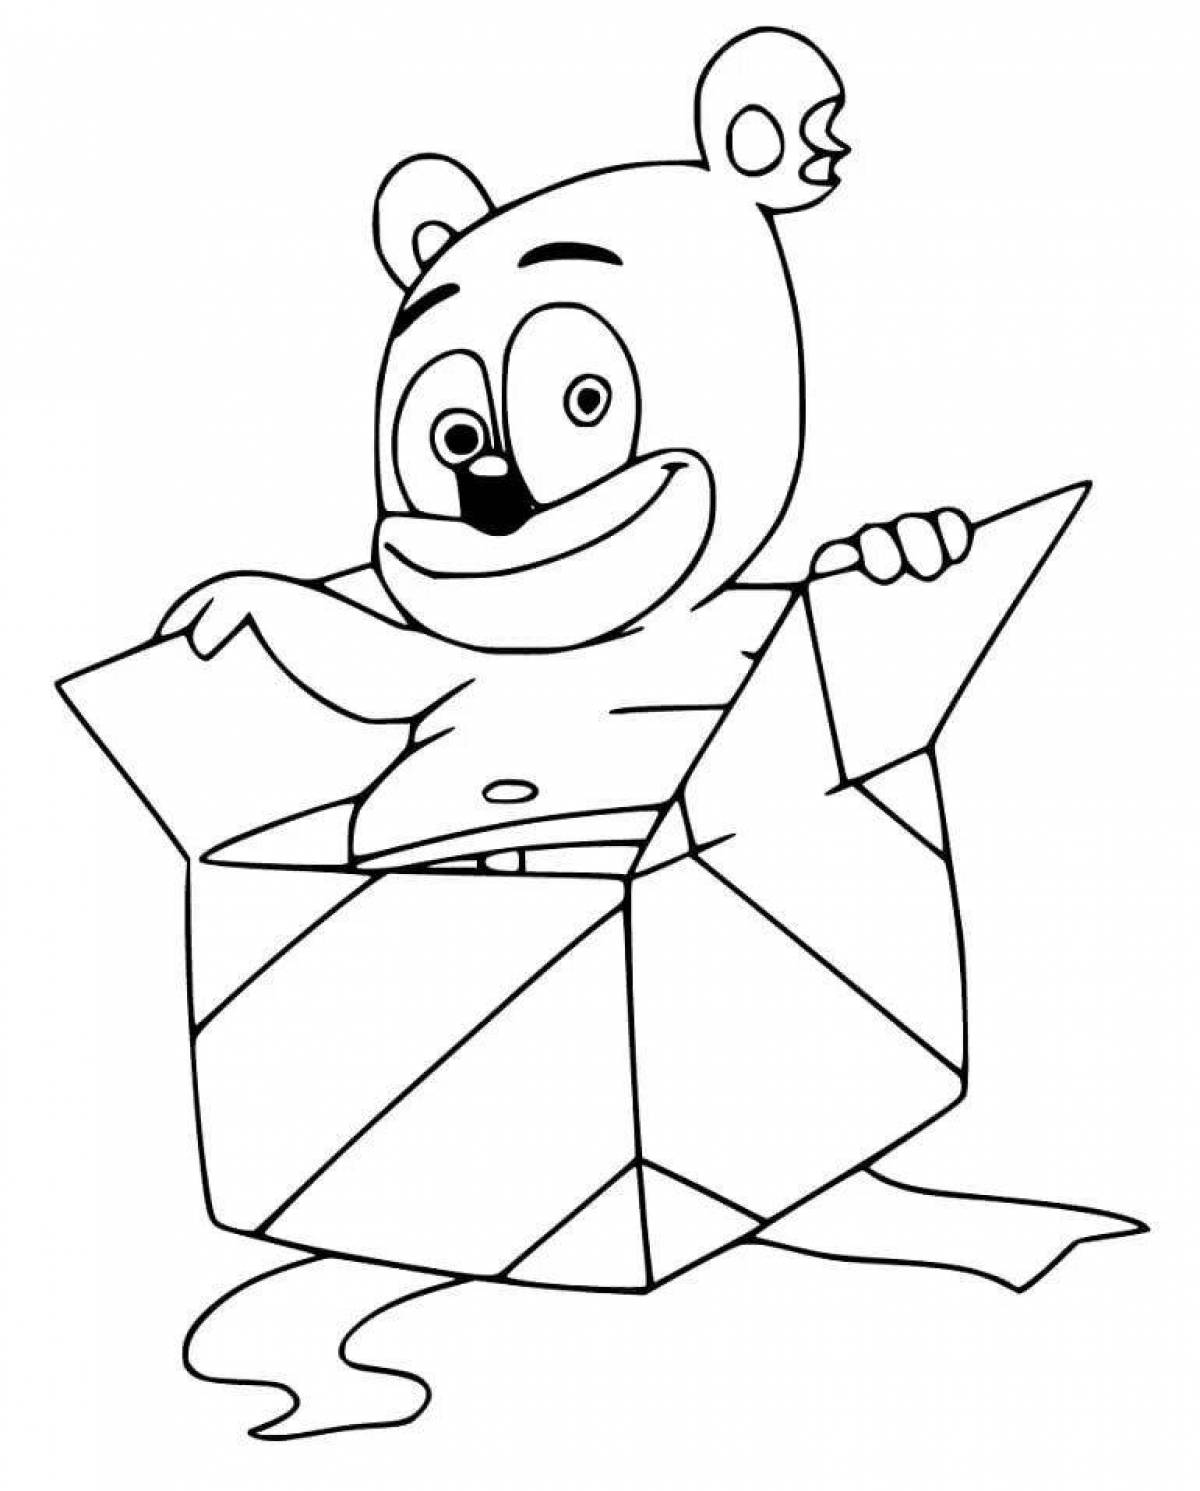 Amazing humber coloring page